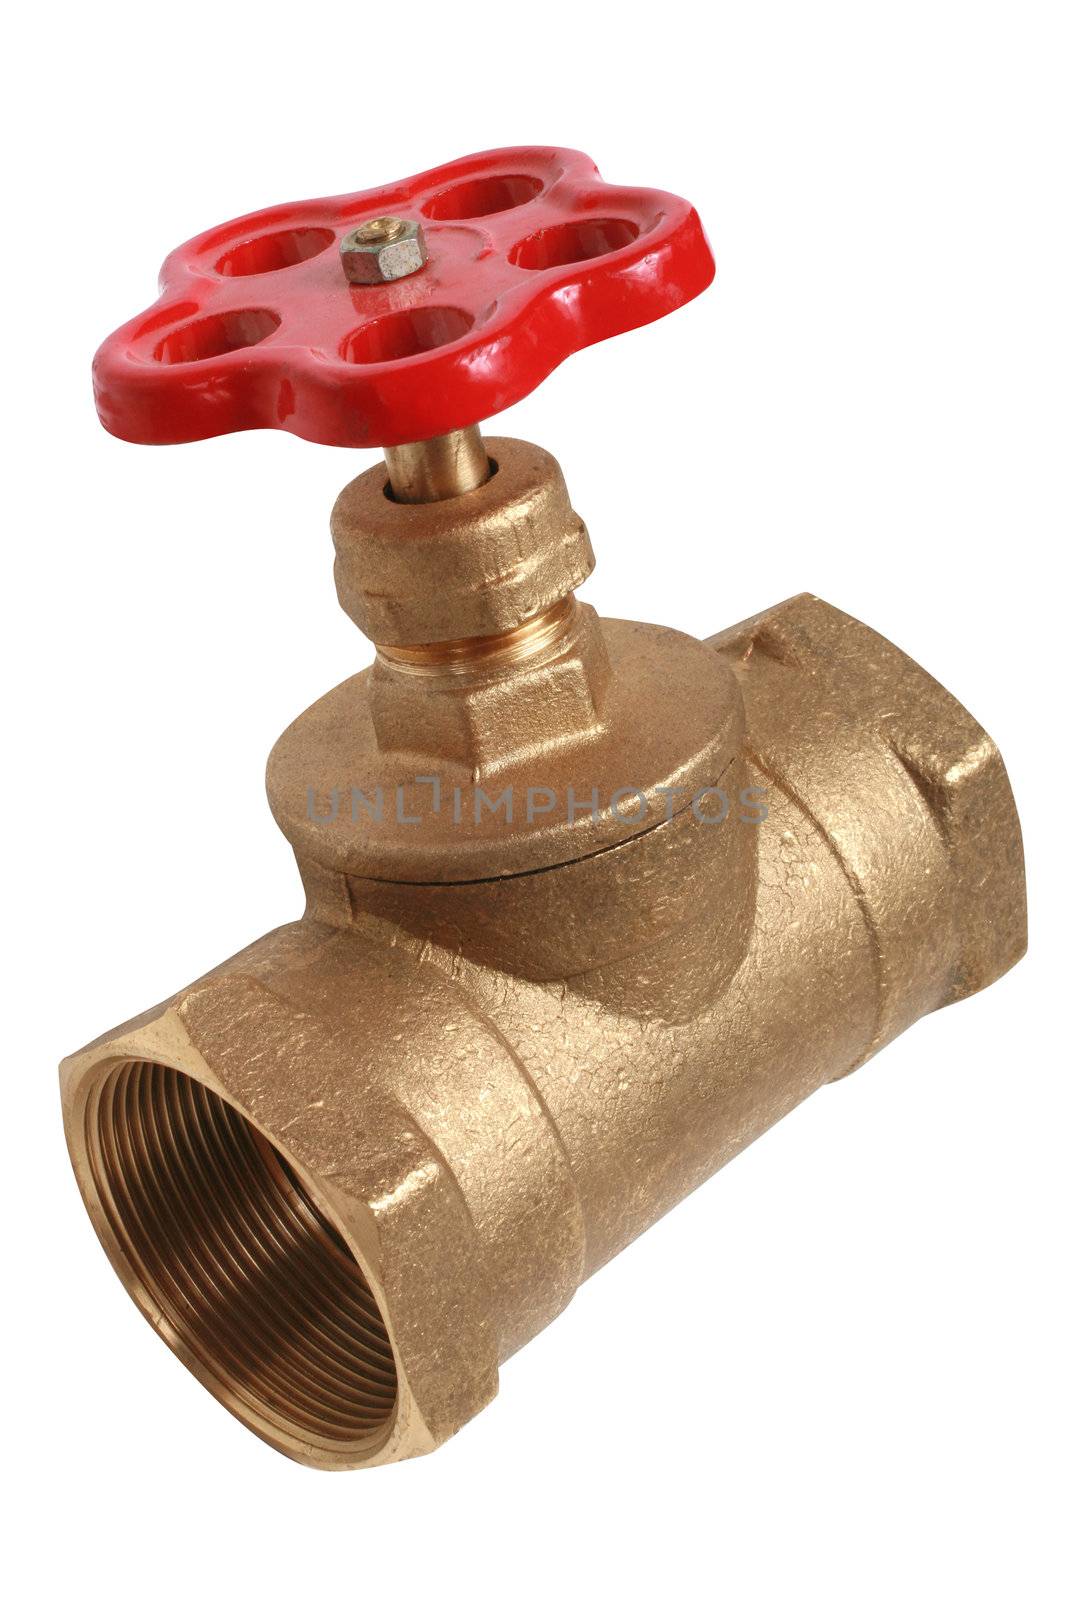 stopcock, water, regulator, control, pipe, tap, valve, pipeline, color, faucet, industry, clear, opening, tool, row, power, handle, tube, flowing, equipment, work, single, nut, metal, iron, new, urban, stabilizser, hydrant